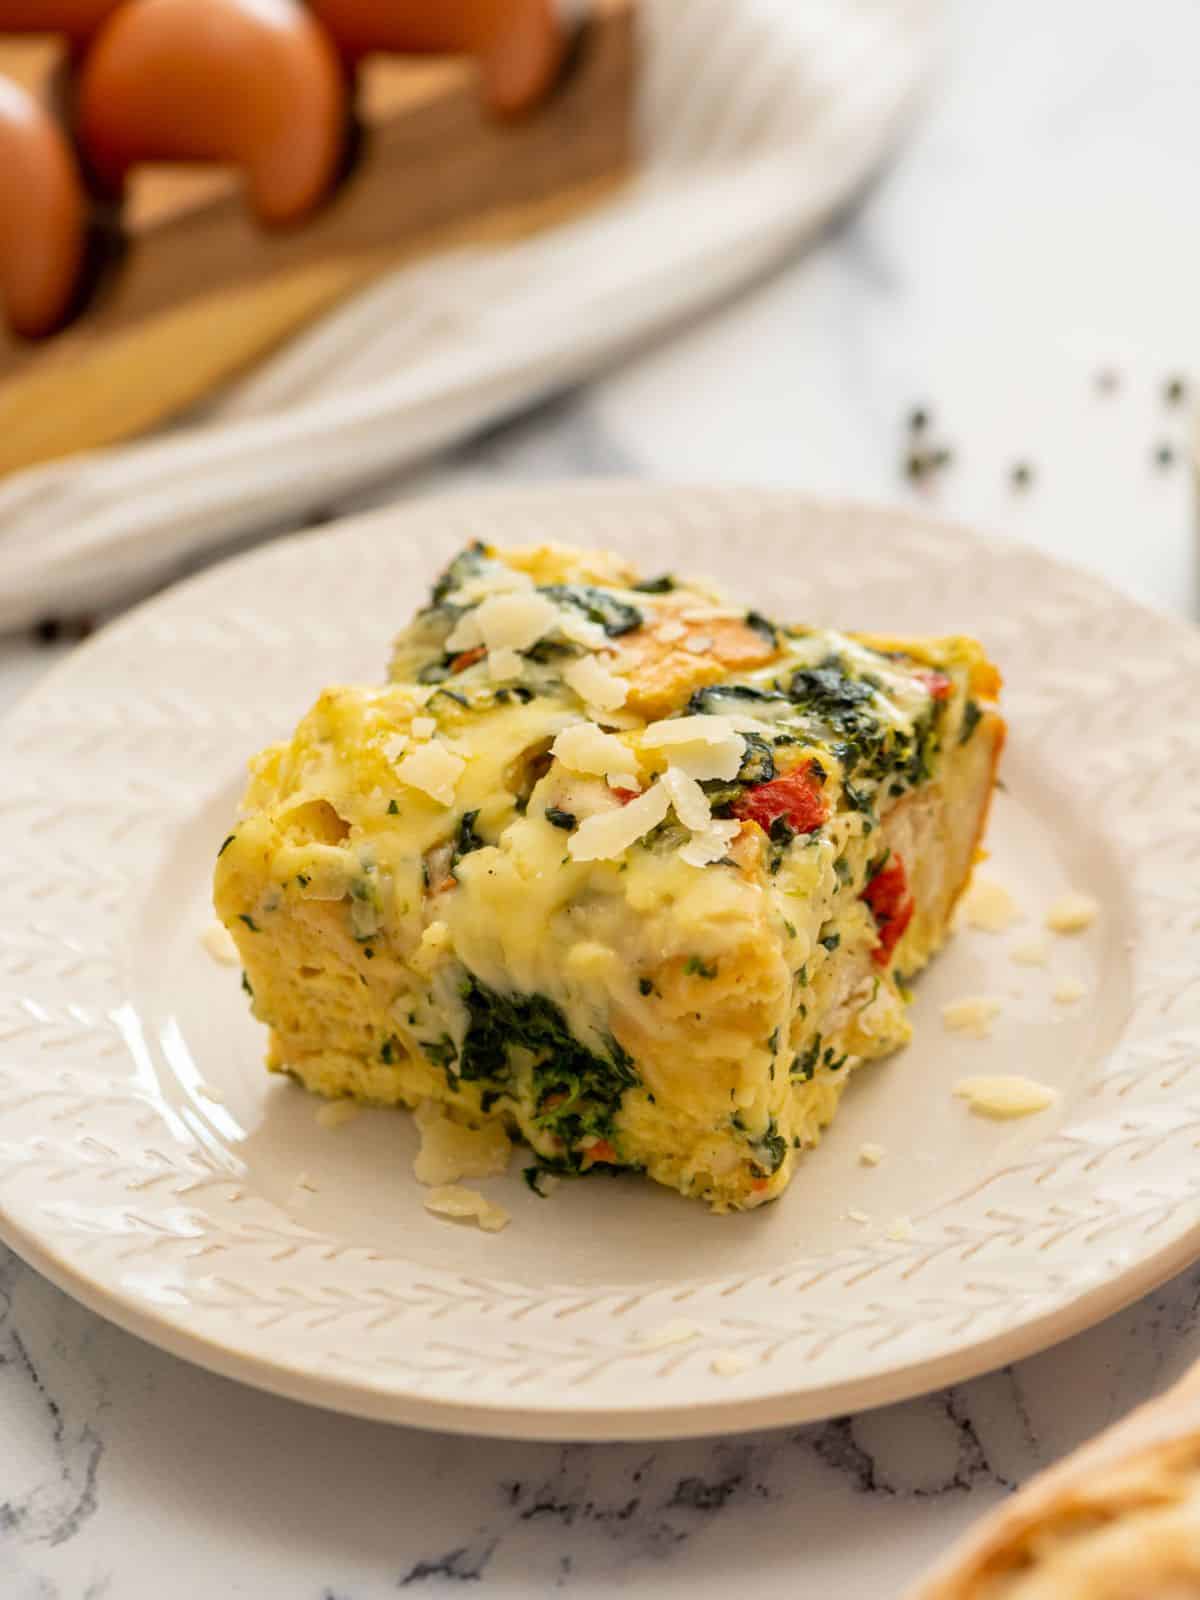 Slice of spinach and cheese breakfast strata on white plate topped with shredded parmesan cheese.